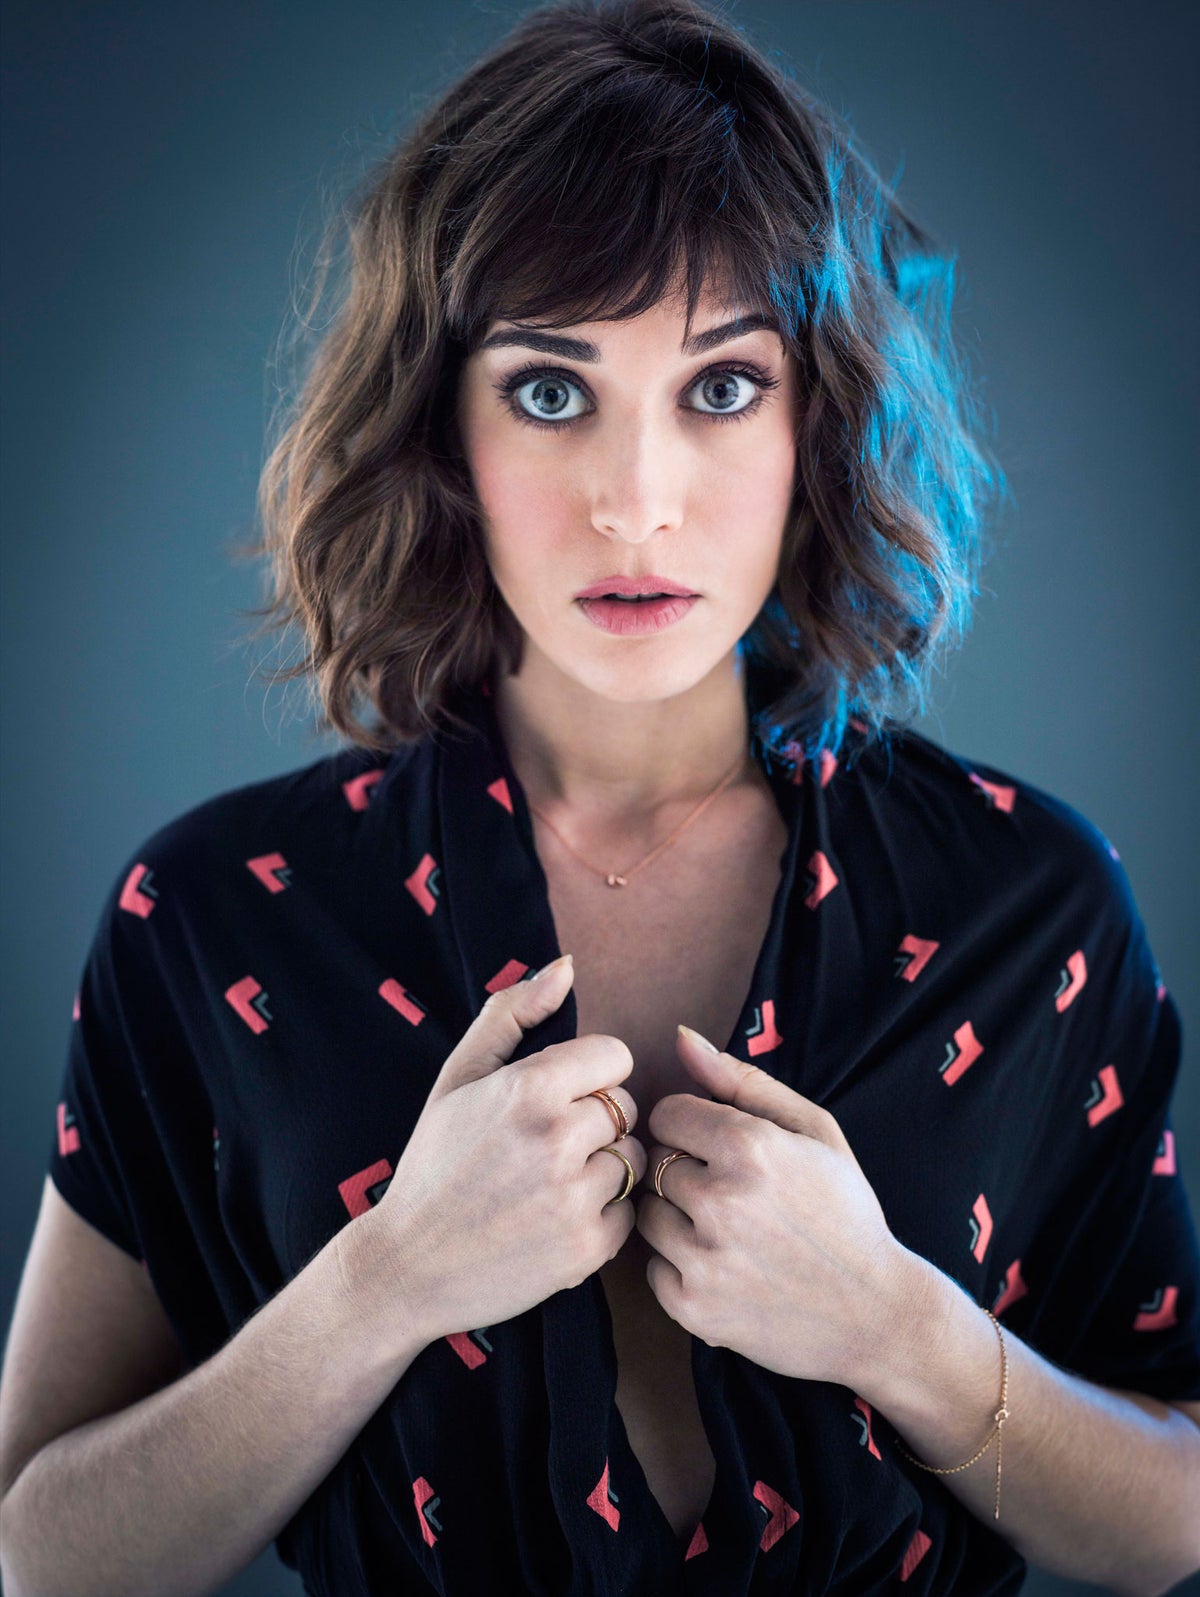 bill sherratt recommends lizzy caplan leaked nudes pic